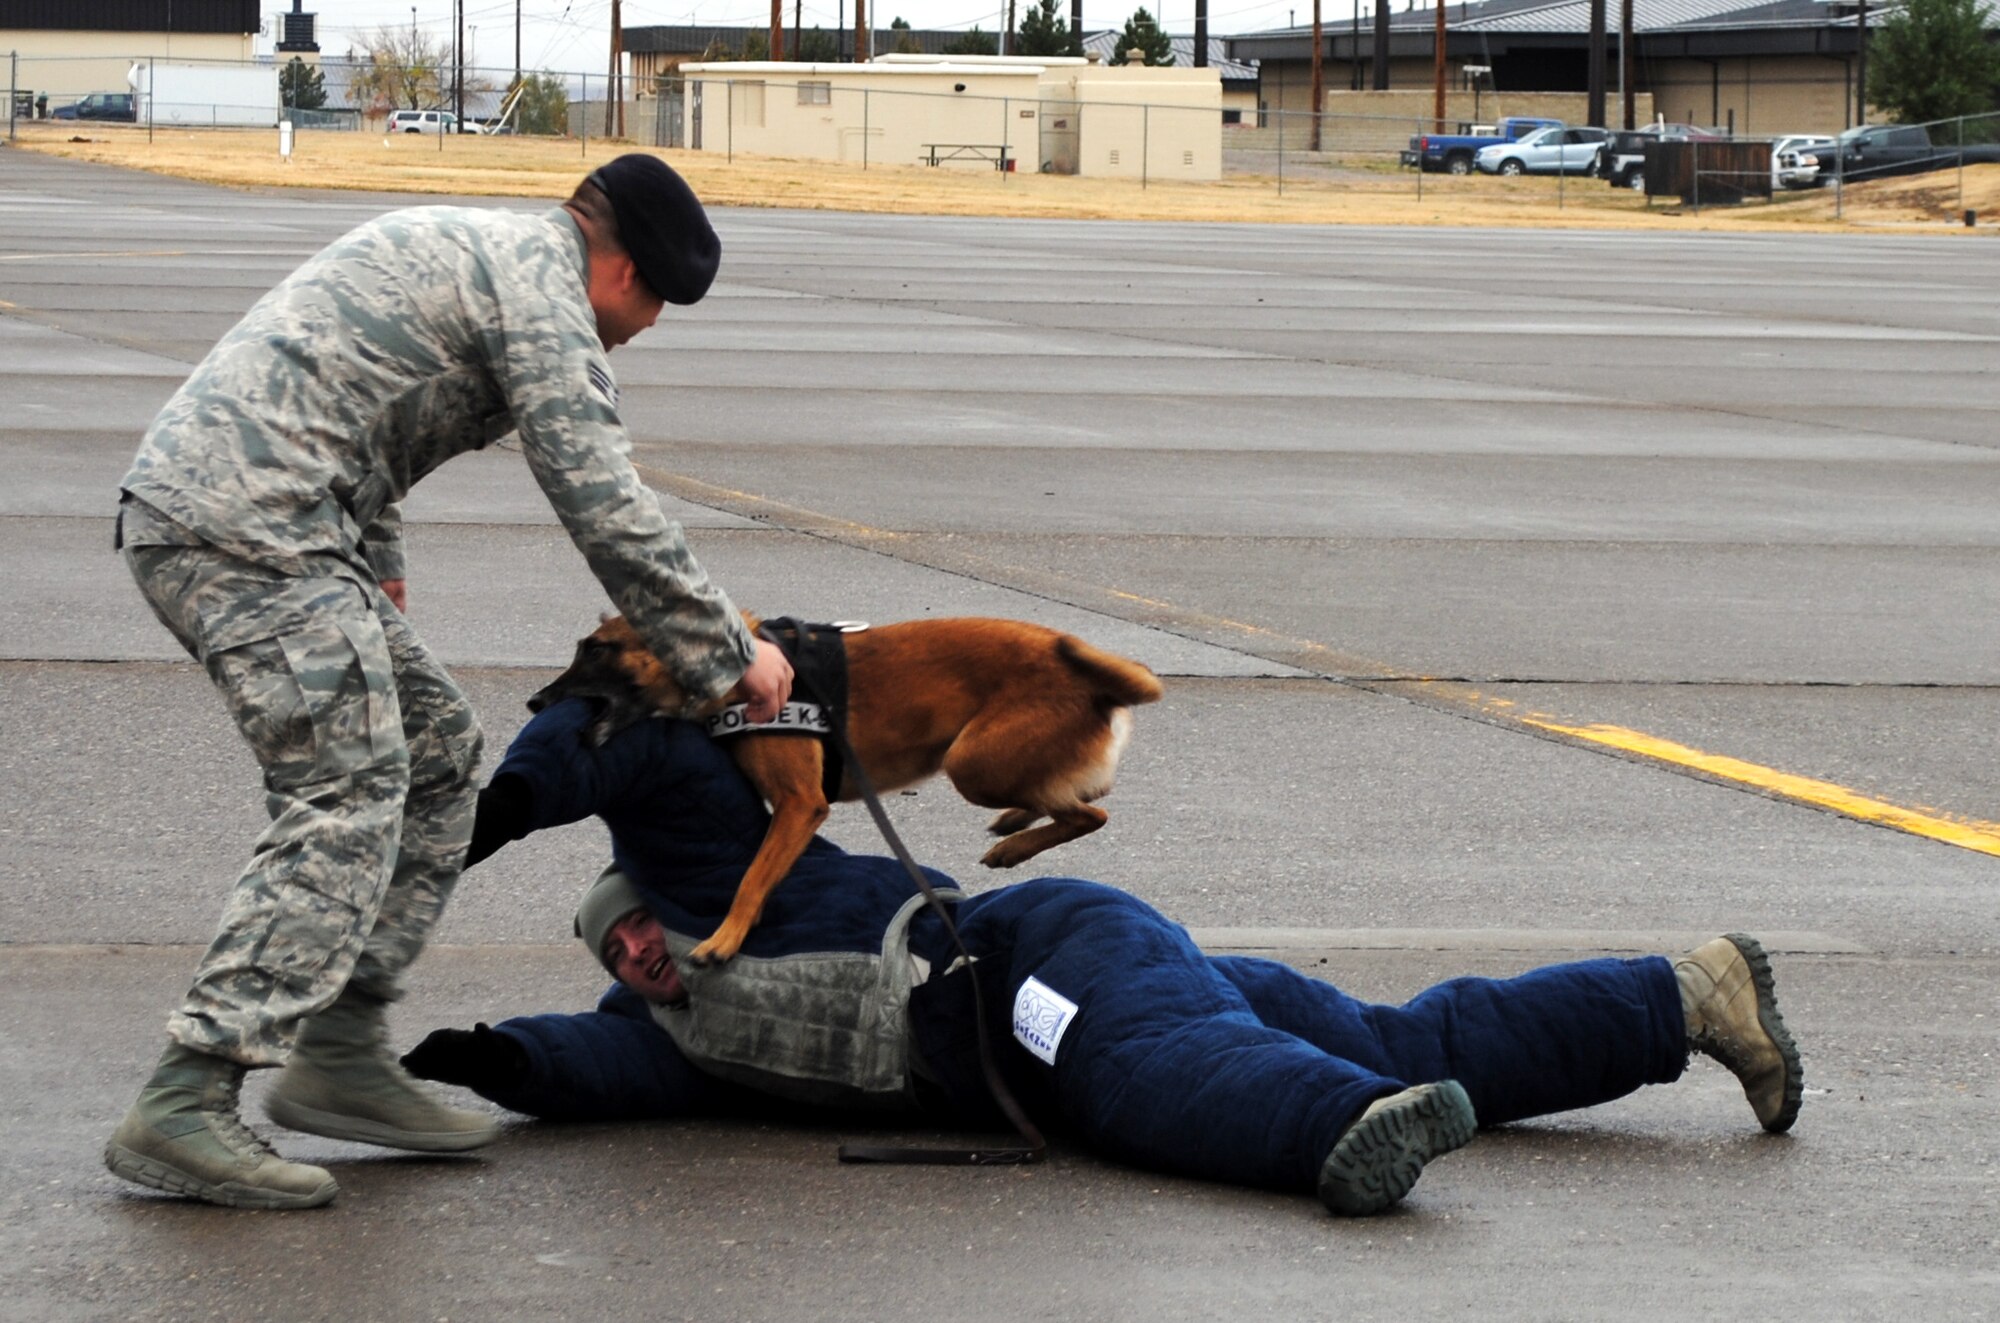 Senior Airman Kyle Kottas, 341st Security Forces Squadron, military working dog handler, left, demonstrates how to apprehend a subject as Senior Airman Michael Caruso, 341st SFS military working dog handler, lies on the ground during a controlled aggression demonstration on the flight line. Bibi, a 7 year-old Belgium Malinois, was the military working dog in the demonstration. (U.S. Air Force photo/Airman 1st Class Katrina Heikkinen)